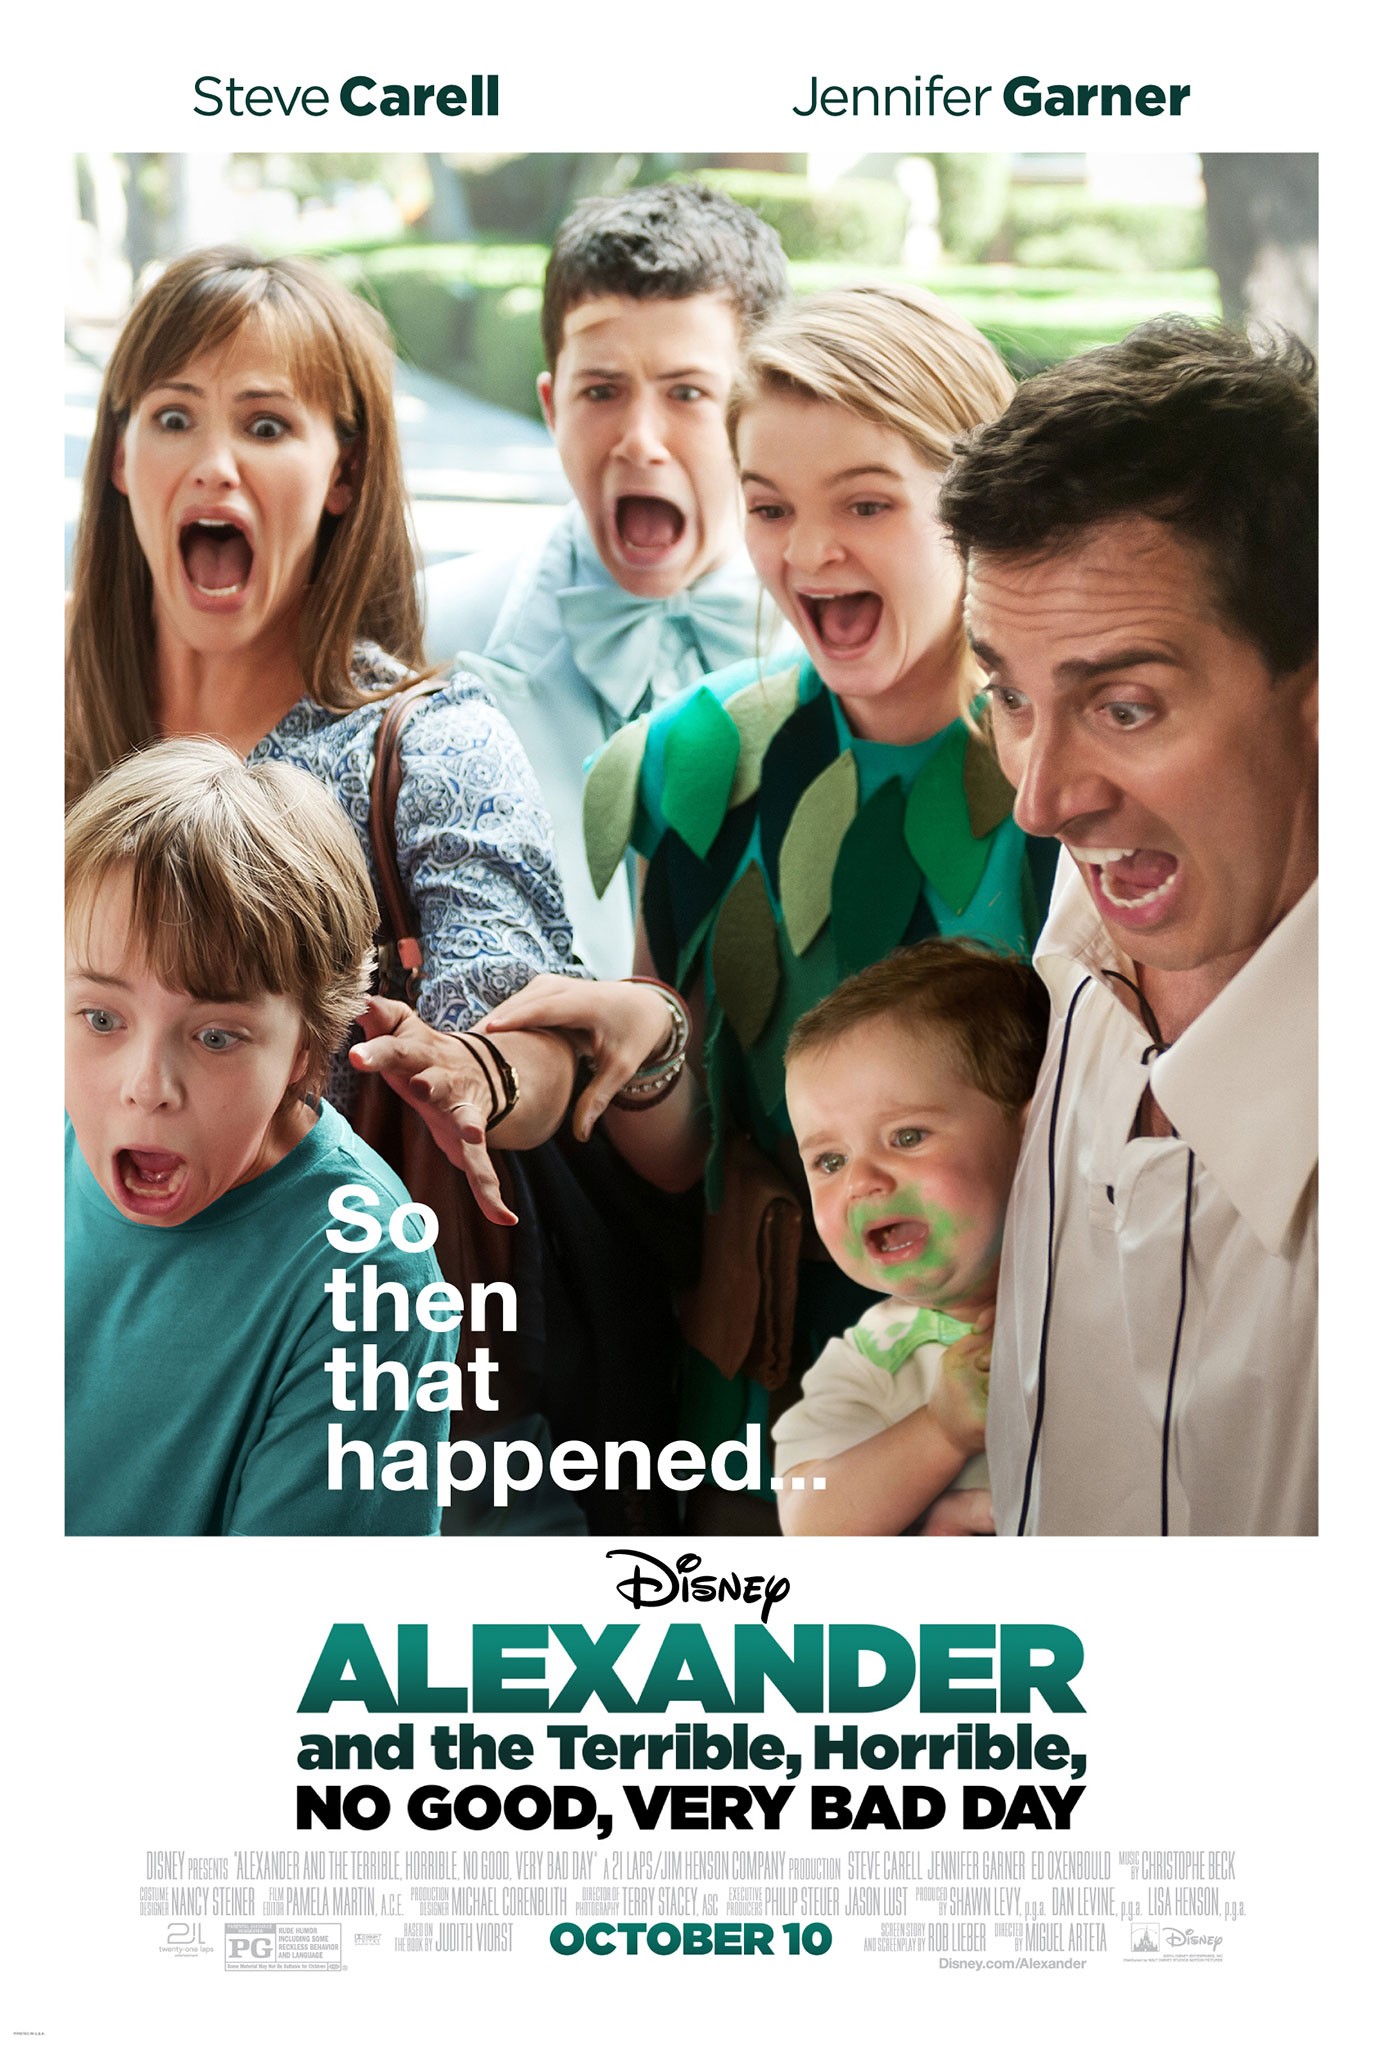 Alexander and the Terrible, Horrible, No Good, Very Bad Day - Disney Wiki - Wikia